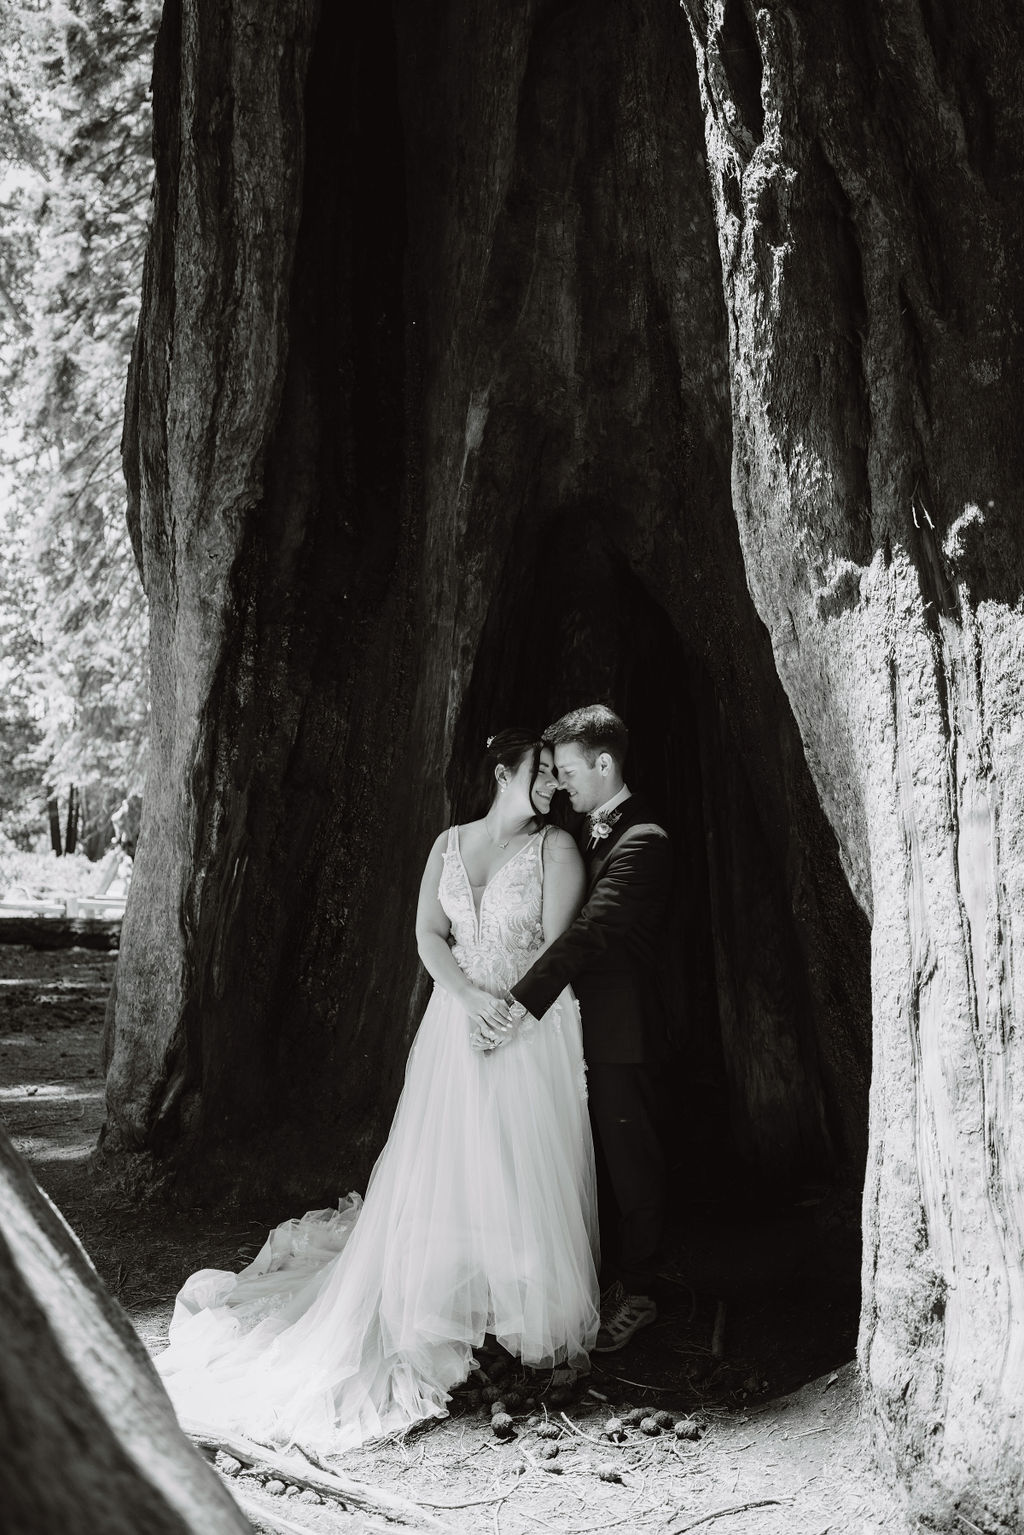 A bride and groom share a kiss in a forest, surrounded by tall trees, with the bride wearing a long, flowing wedding gown at their Adventurous Elopement at Sequoia National Park